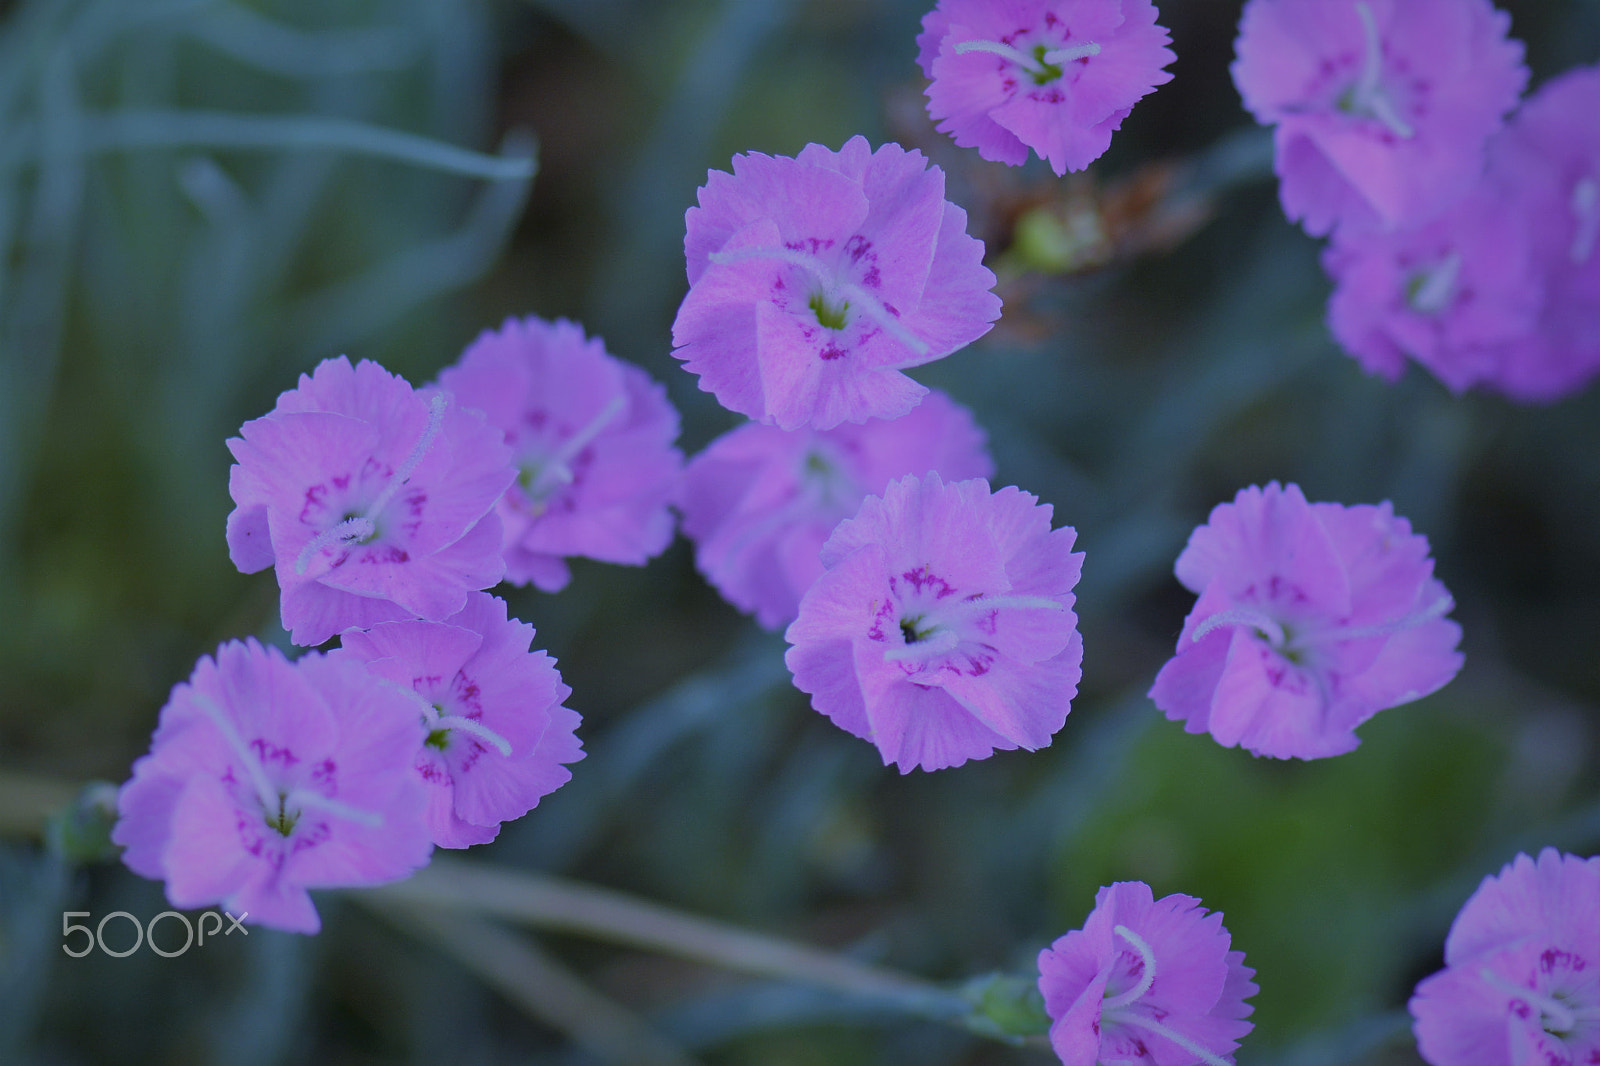 Nikon D7100 + Nikon AF-S Micro-Nikkor 105mm F2.8G IF-ED VR sample photo. Pink tiny flowers growing on the lawn. photography